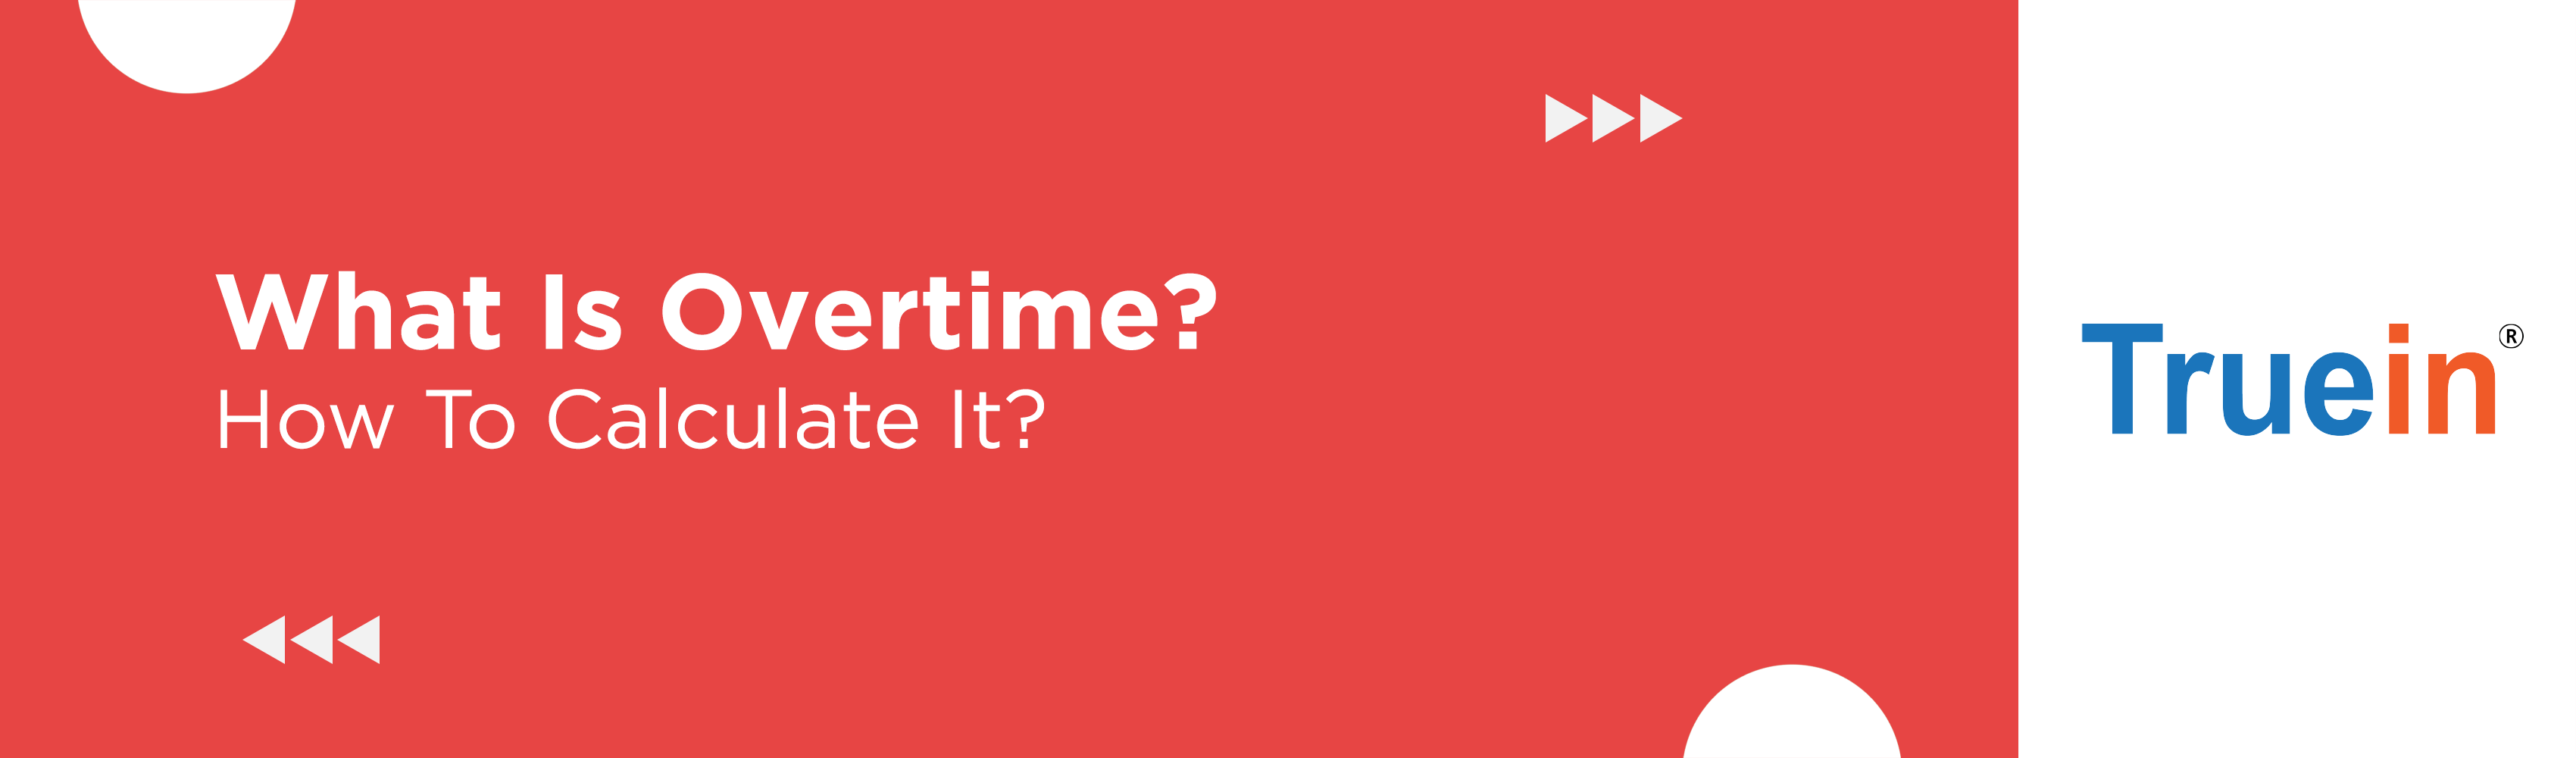 What Is Overtime and How To Calculate It?